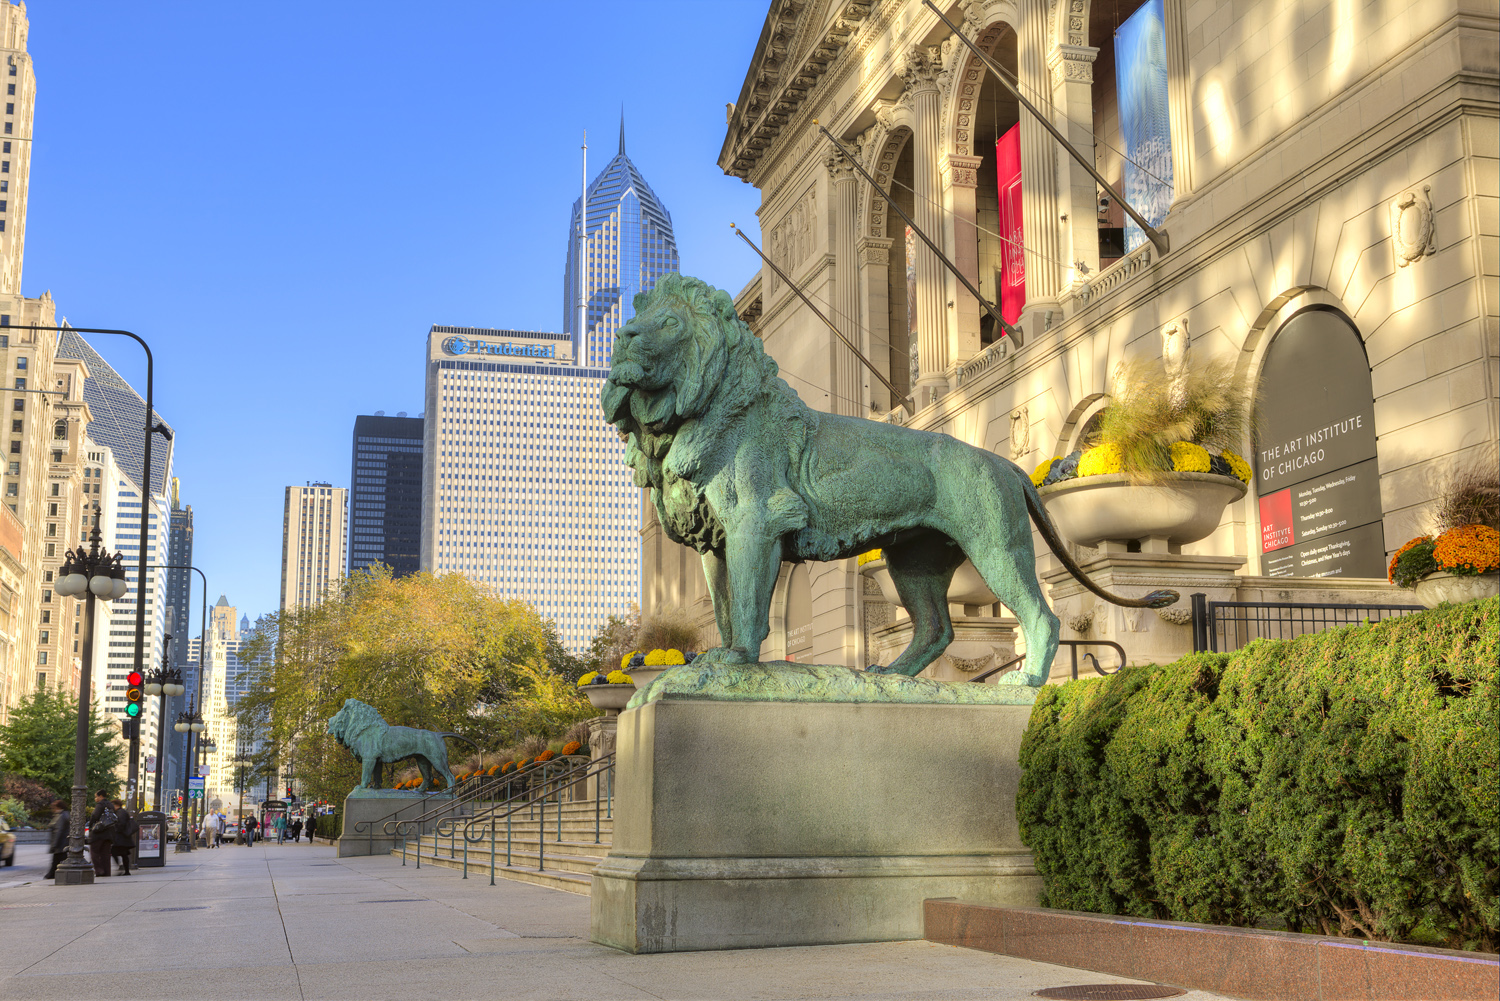 Famous lion sculpture in front of Art Institute in Chicago on a sunny day